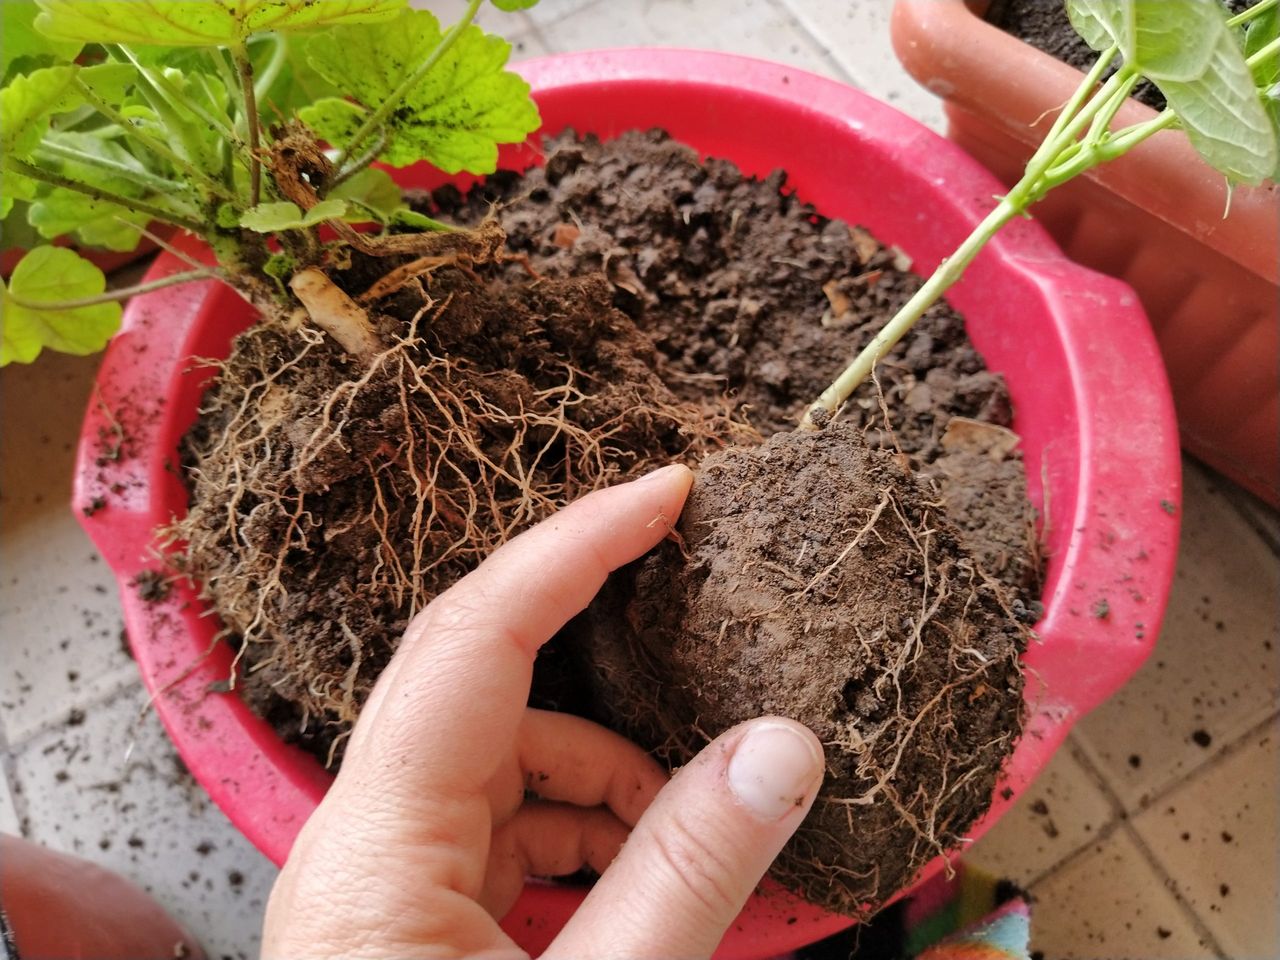 Geranium transplant at home. Female hands work with soil, tools and flower pots. Spring work on the balcony or terrace. Home floriculture and crop production. Green leaves and roots of pelargonium.